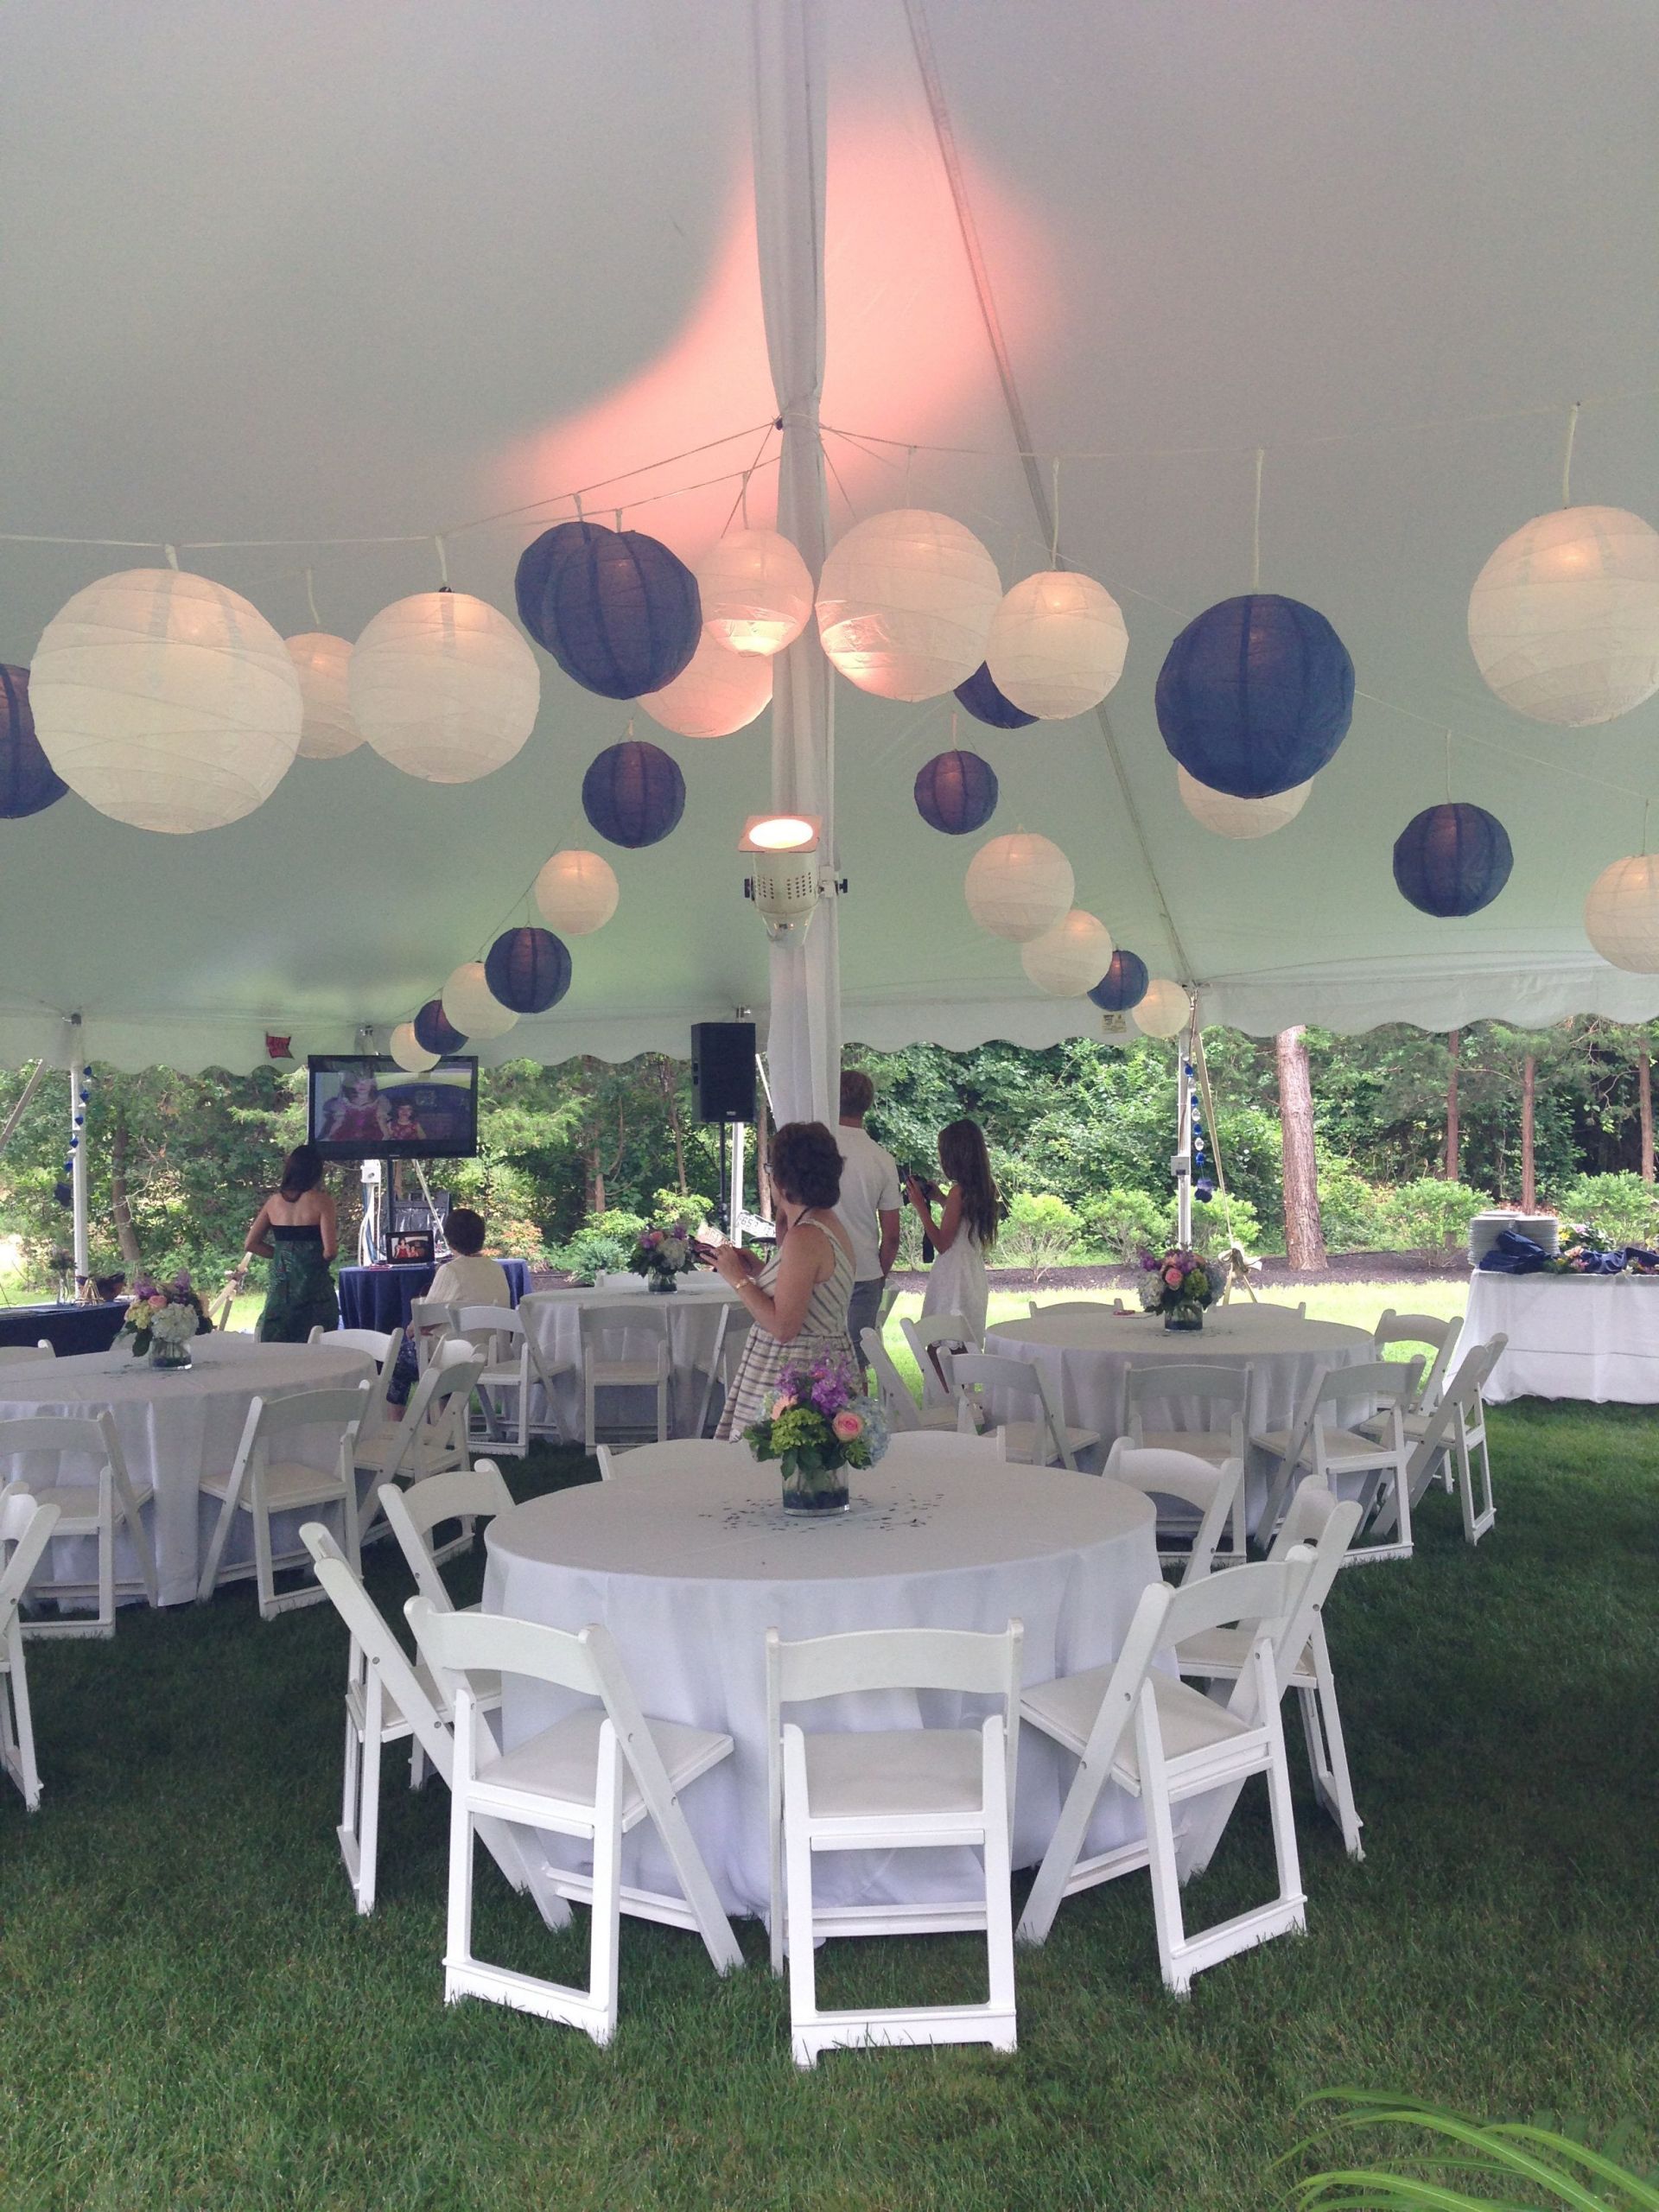 Graduation Party Ideas And Decorations
 Tented blue and white graduation party